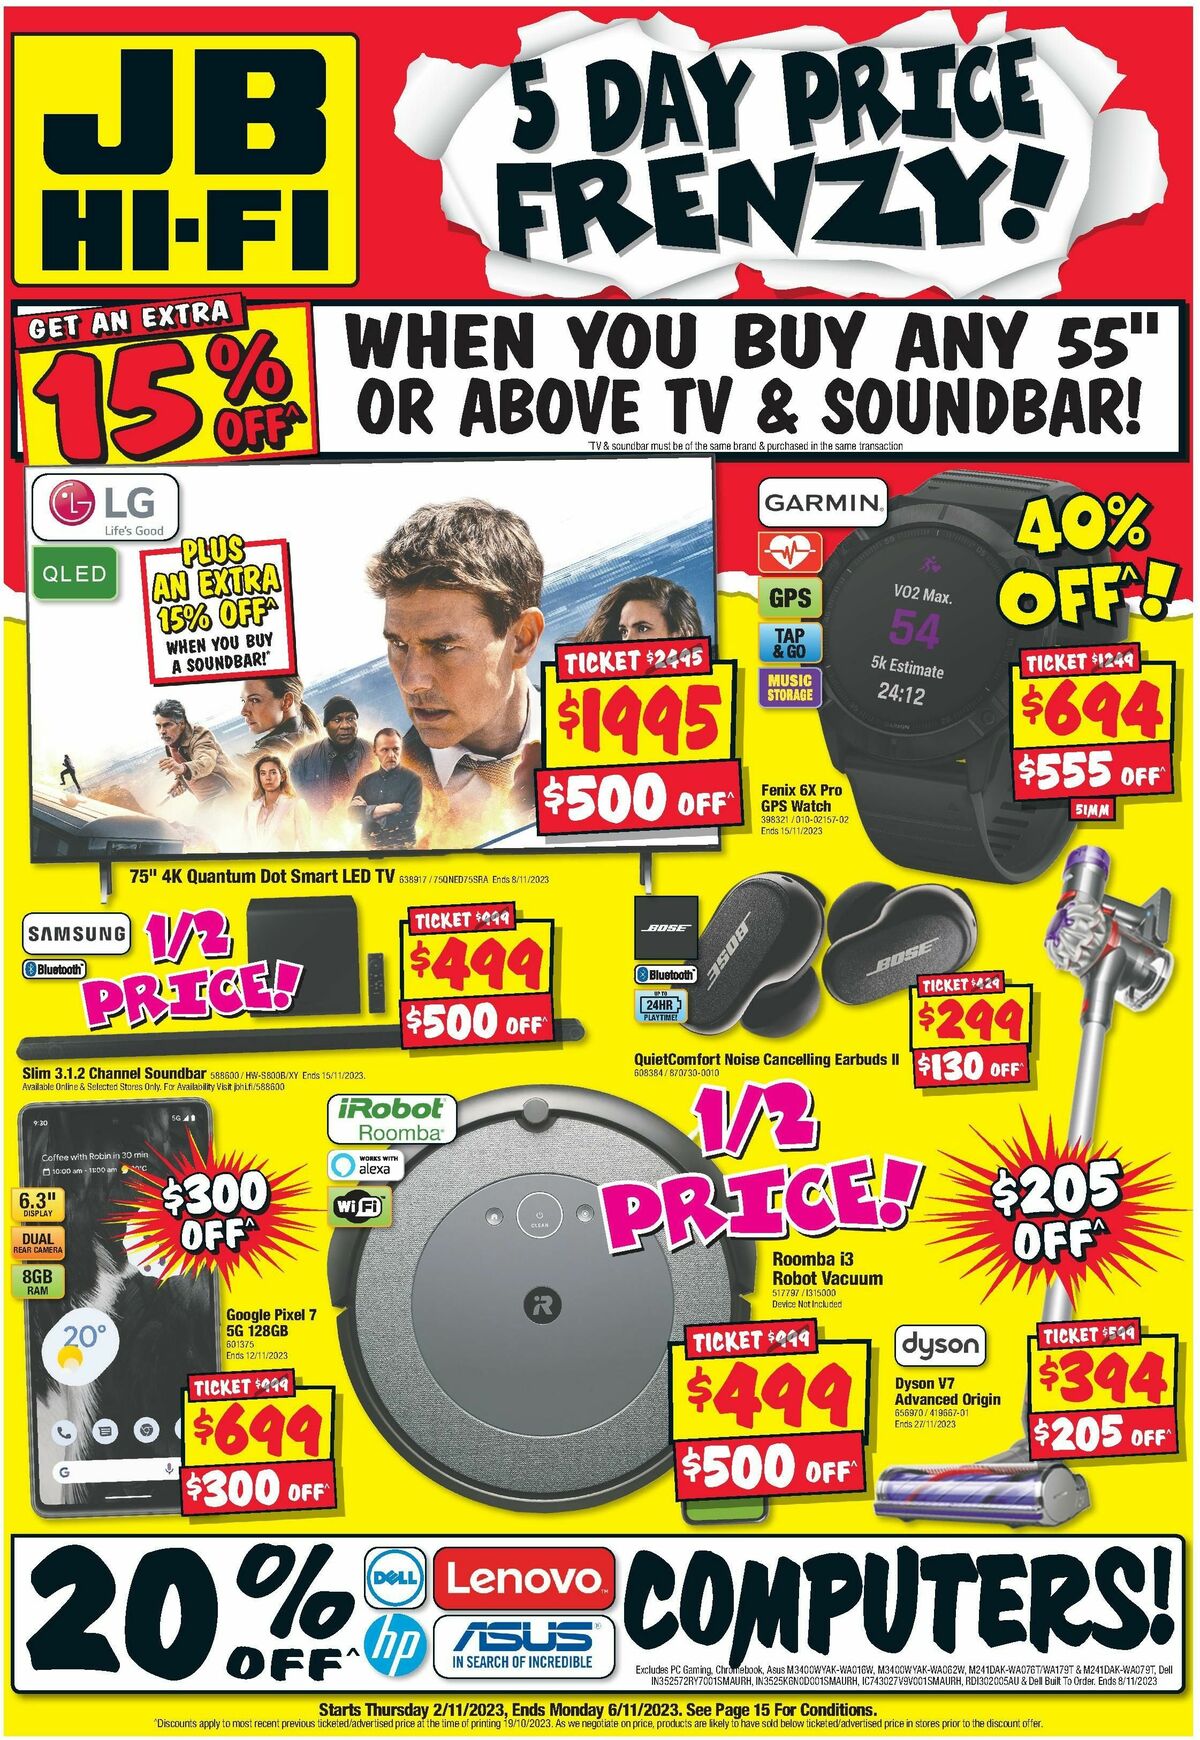 JB Hi-Fi 5 Day Price Frenzy Catalogues from 2 November